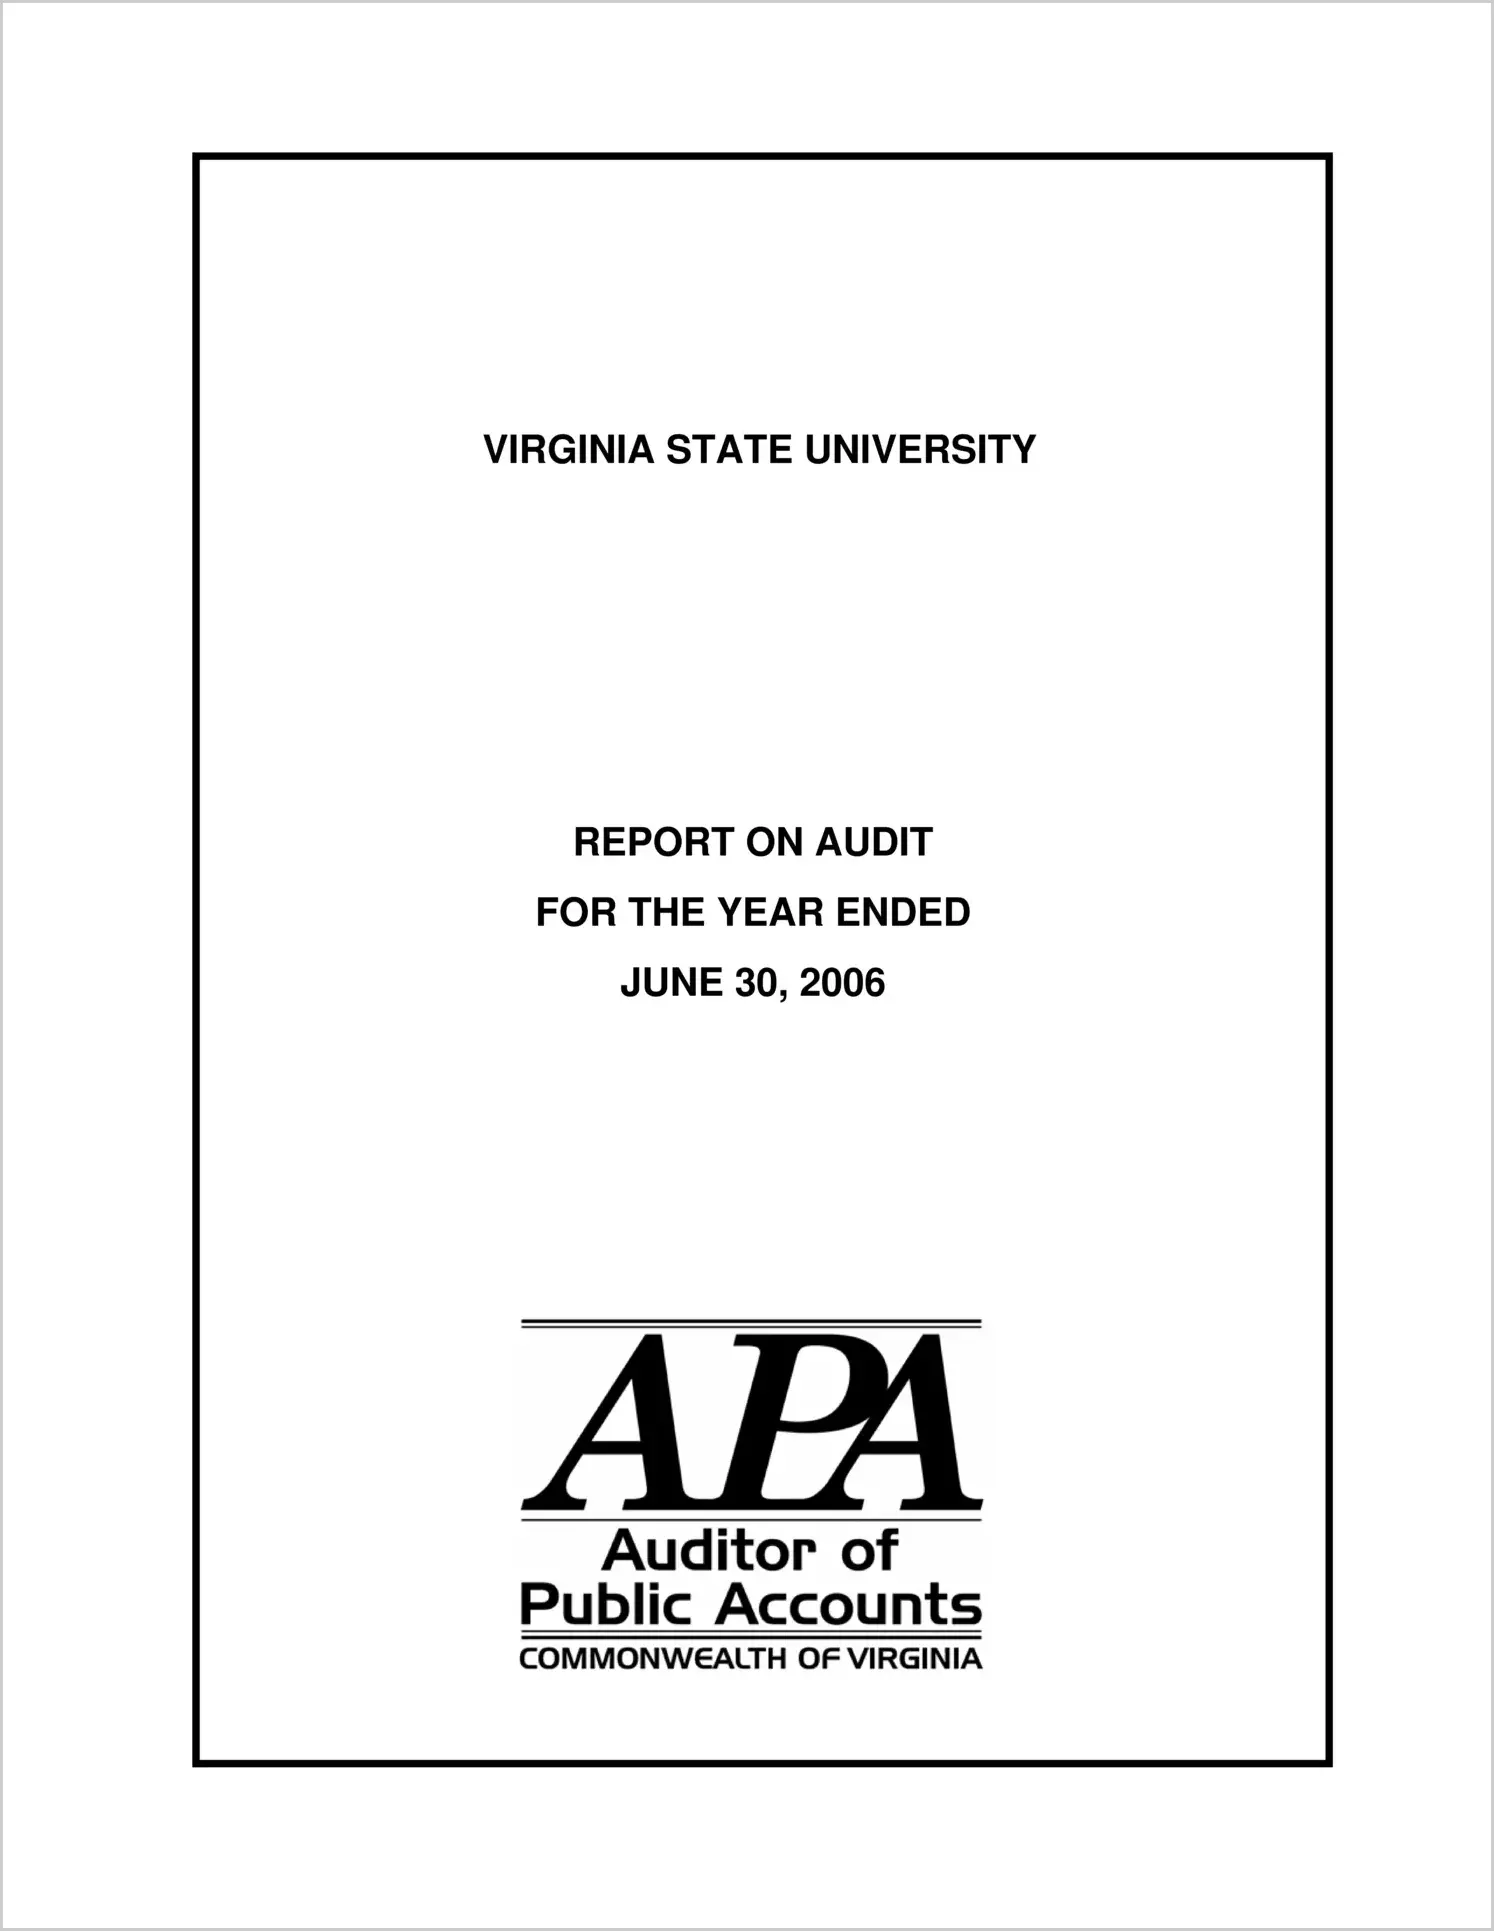 Virginia State University for the year ended June 30, 2006